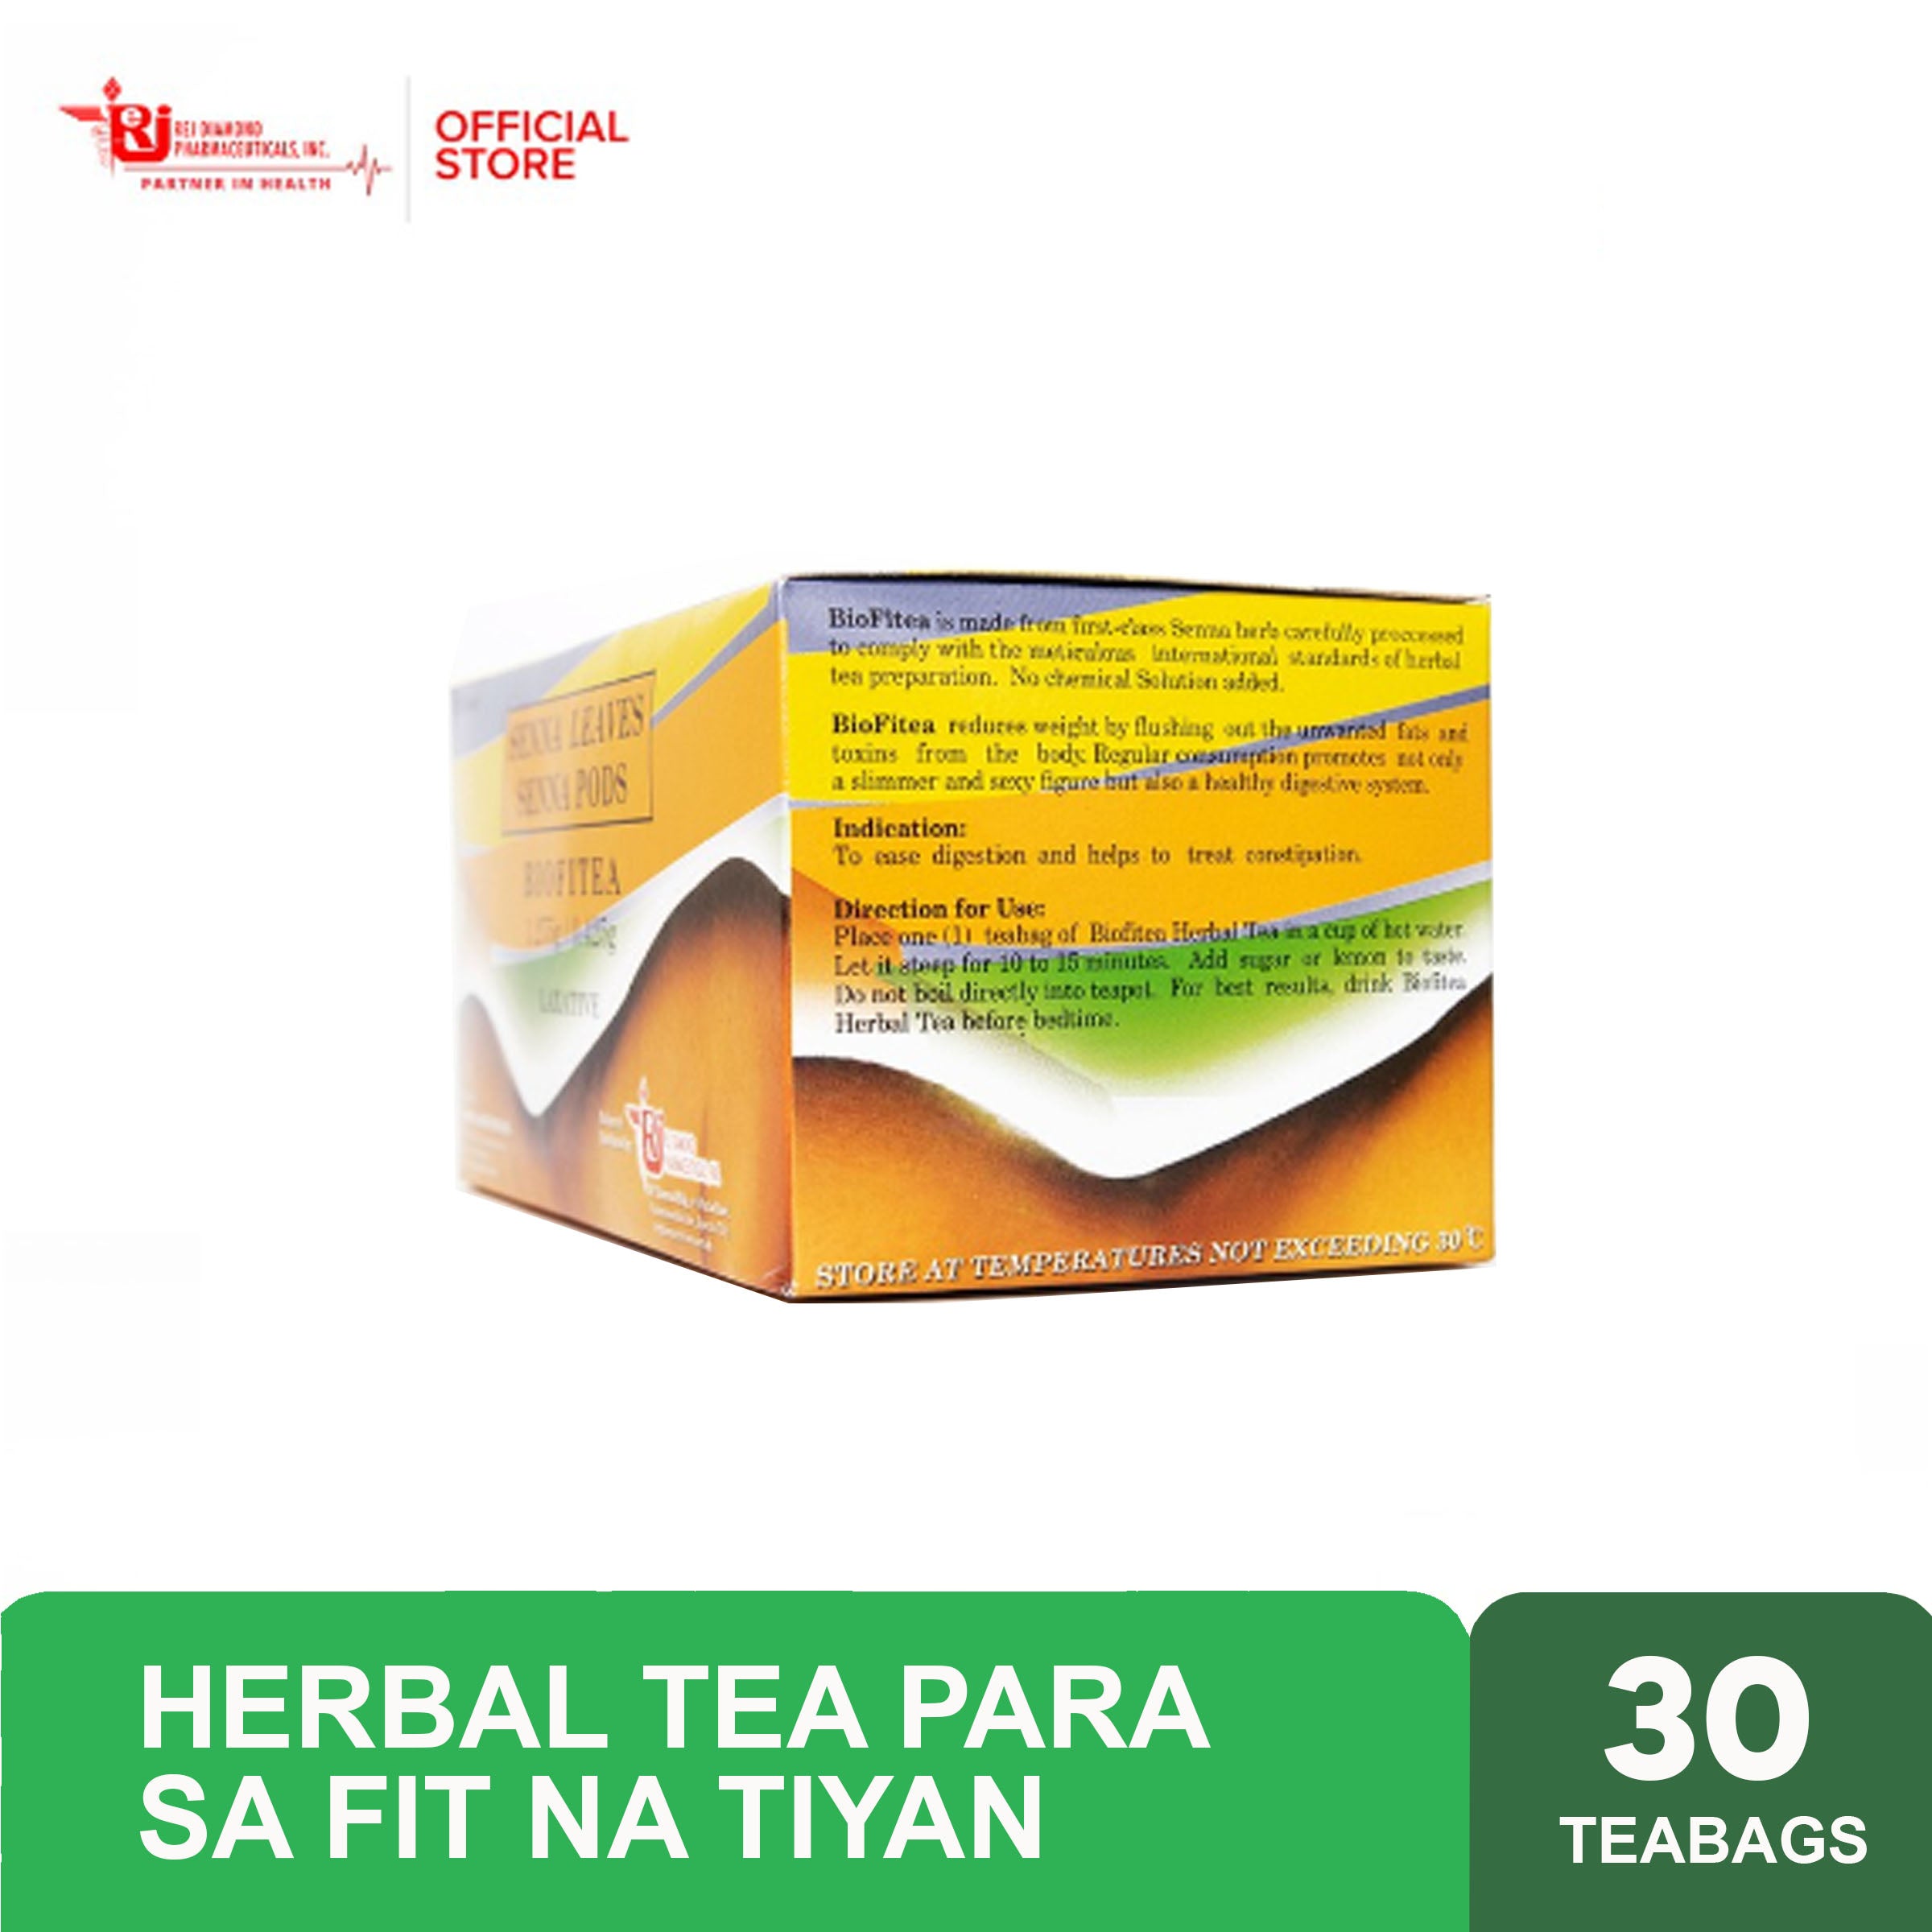 Biofitea Slimming Herbal Tea with Senna Leaves and Senna Pods - 30 Teabags (Laxative and Detox)